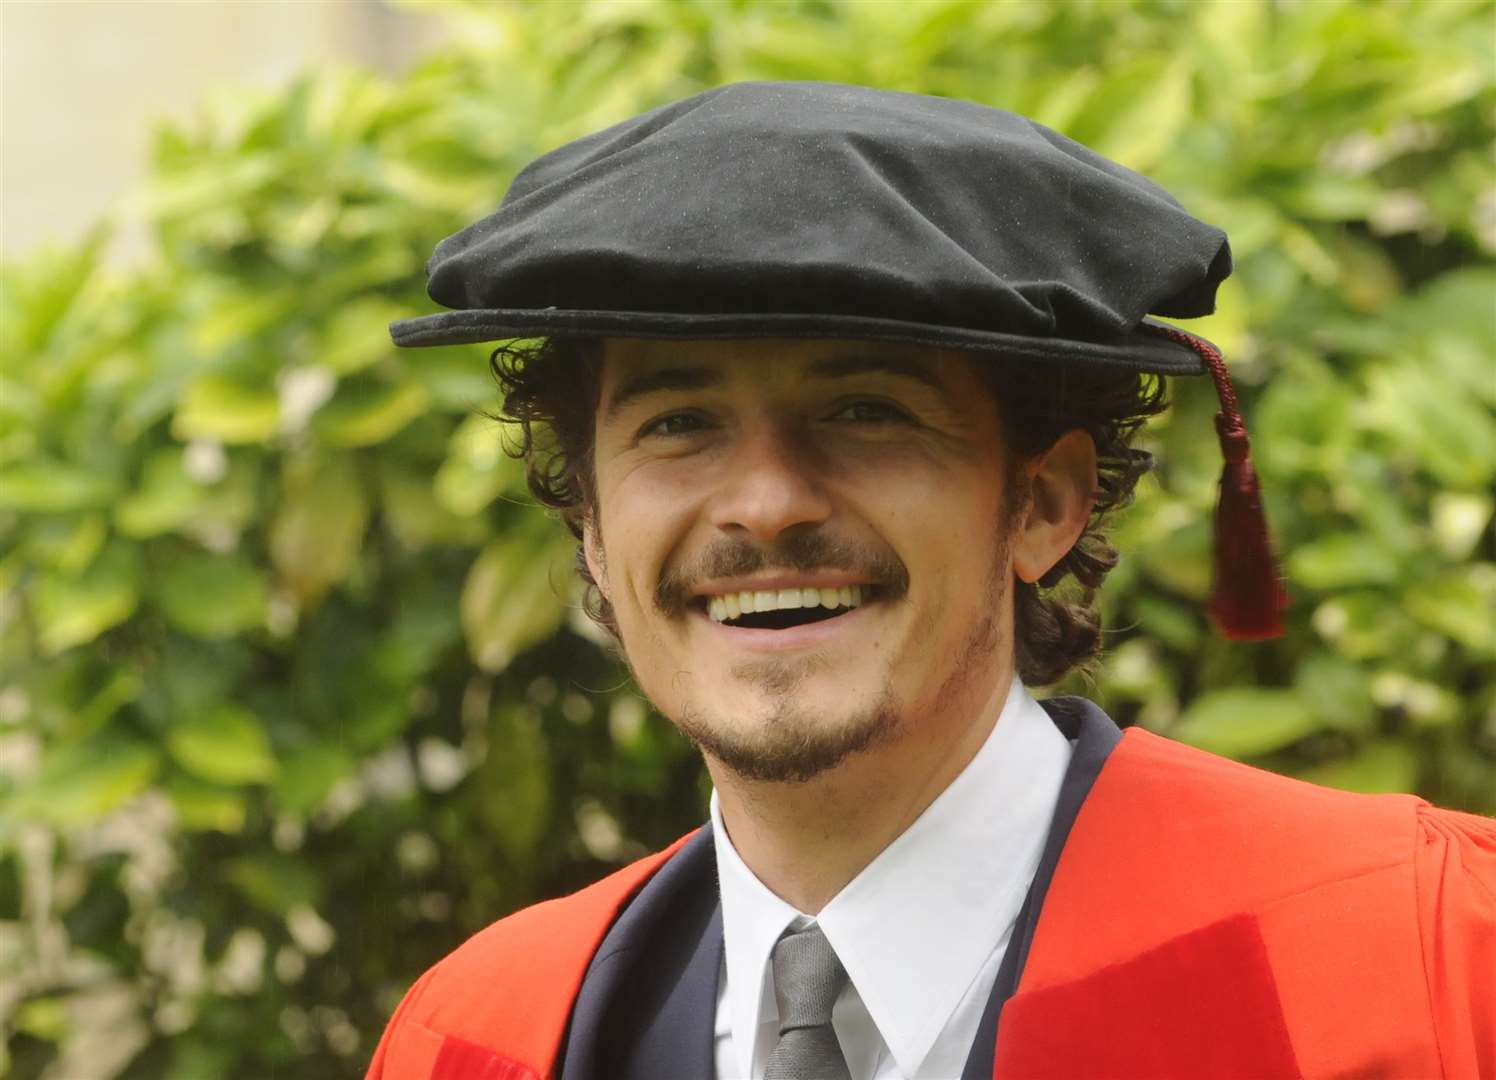 Mr Bloom, now 44, received an honorary degree at Canterbury Cathedral in 2010